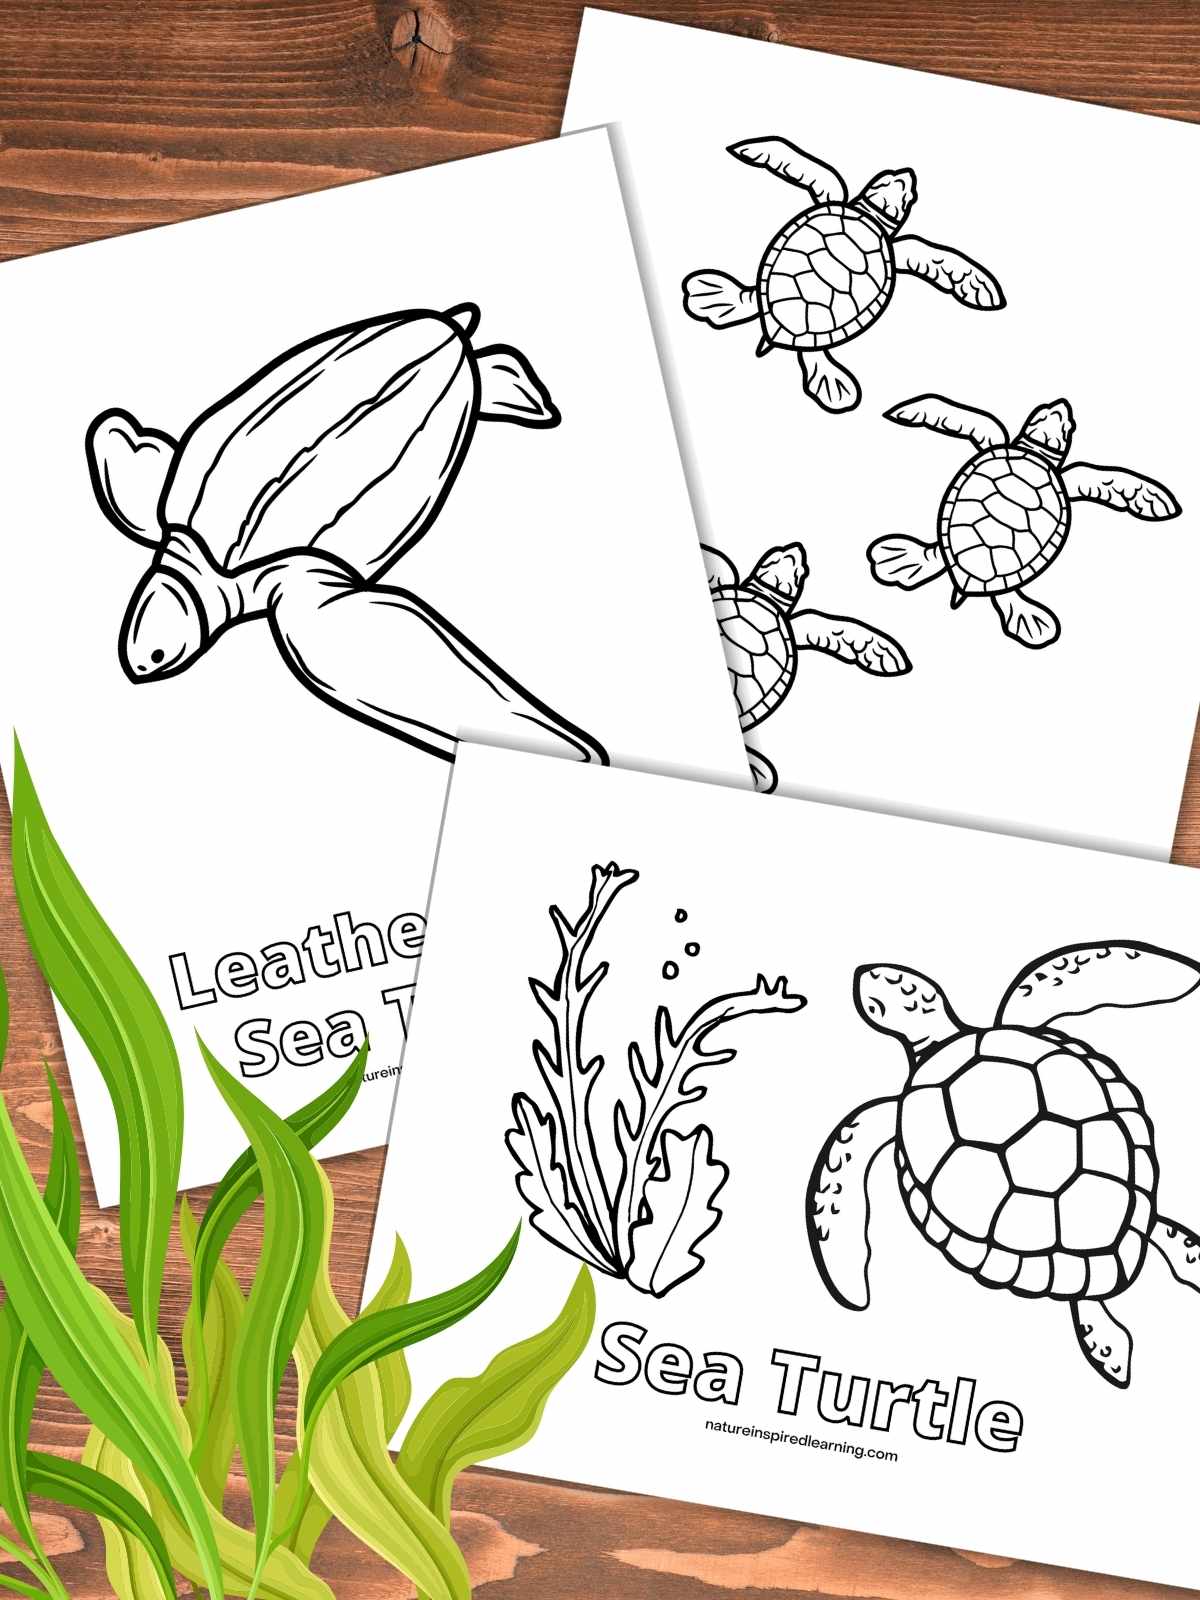 three black and white sea turtle coloring sheets overlapping on a wooden background. Green kelp bottom left